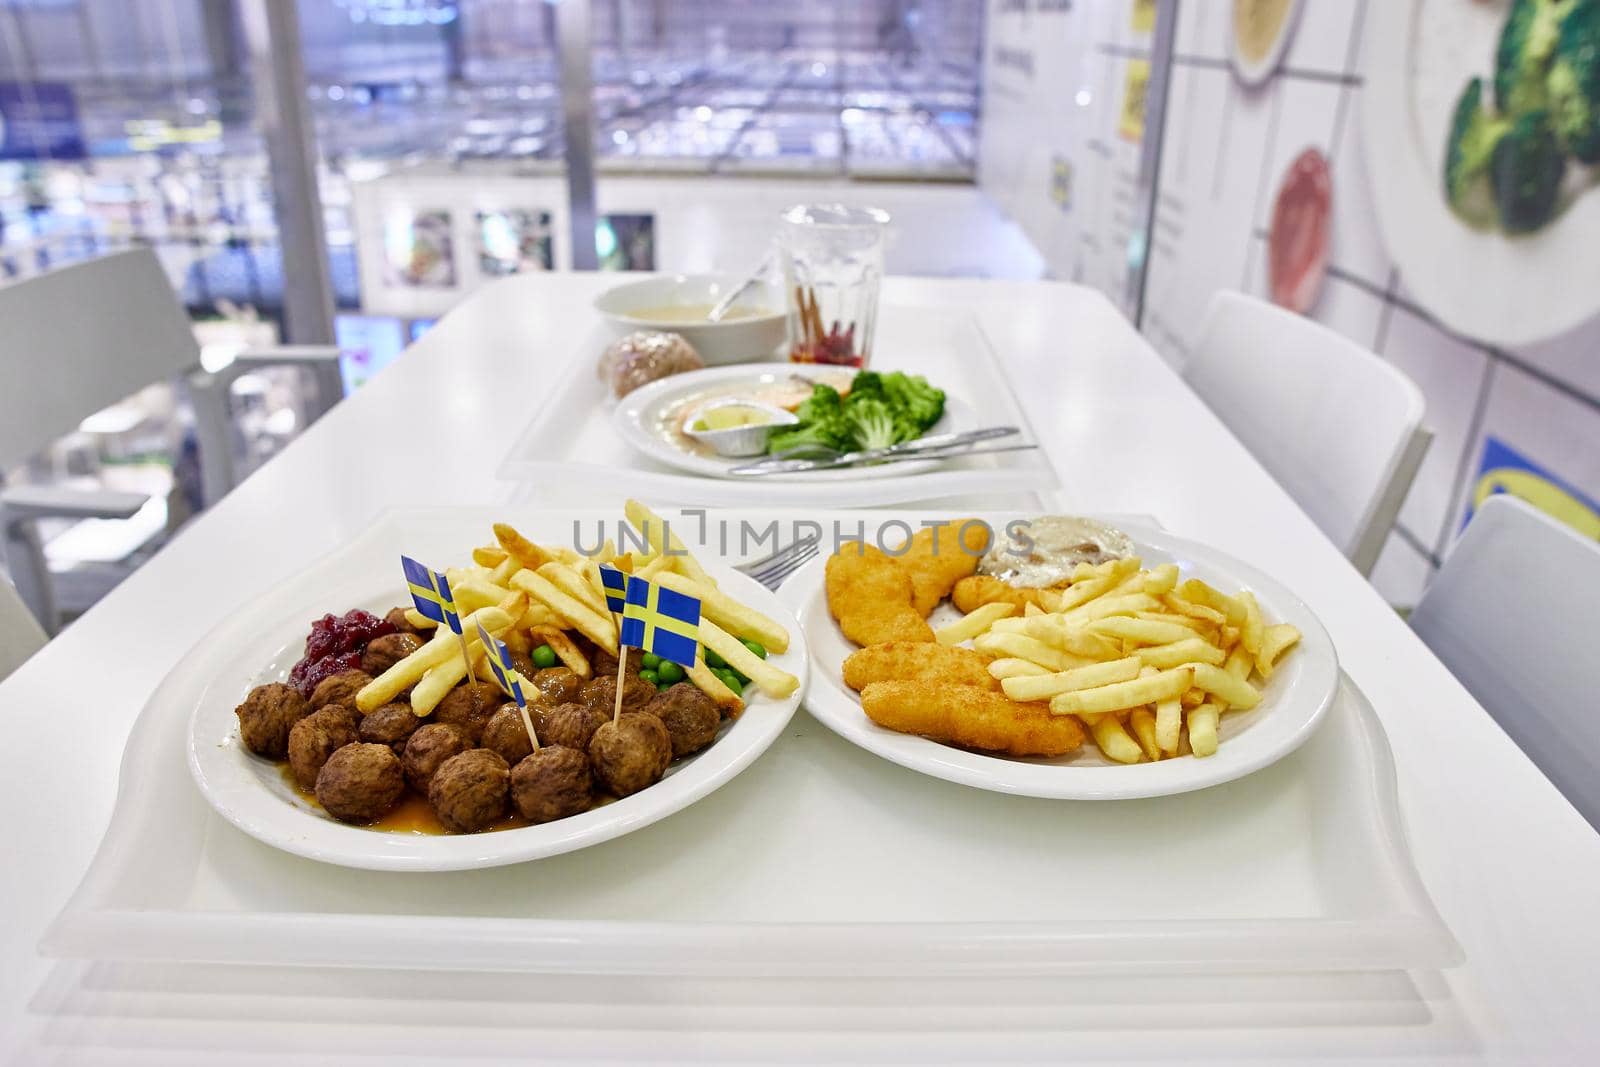 SAMARA, RUSSIA - JANUARY 11, 2022: Meatballs and French fries at ikea restaurant by vadiar